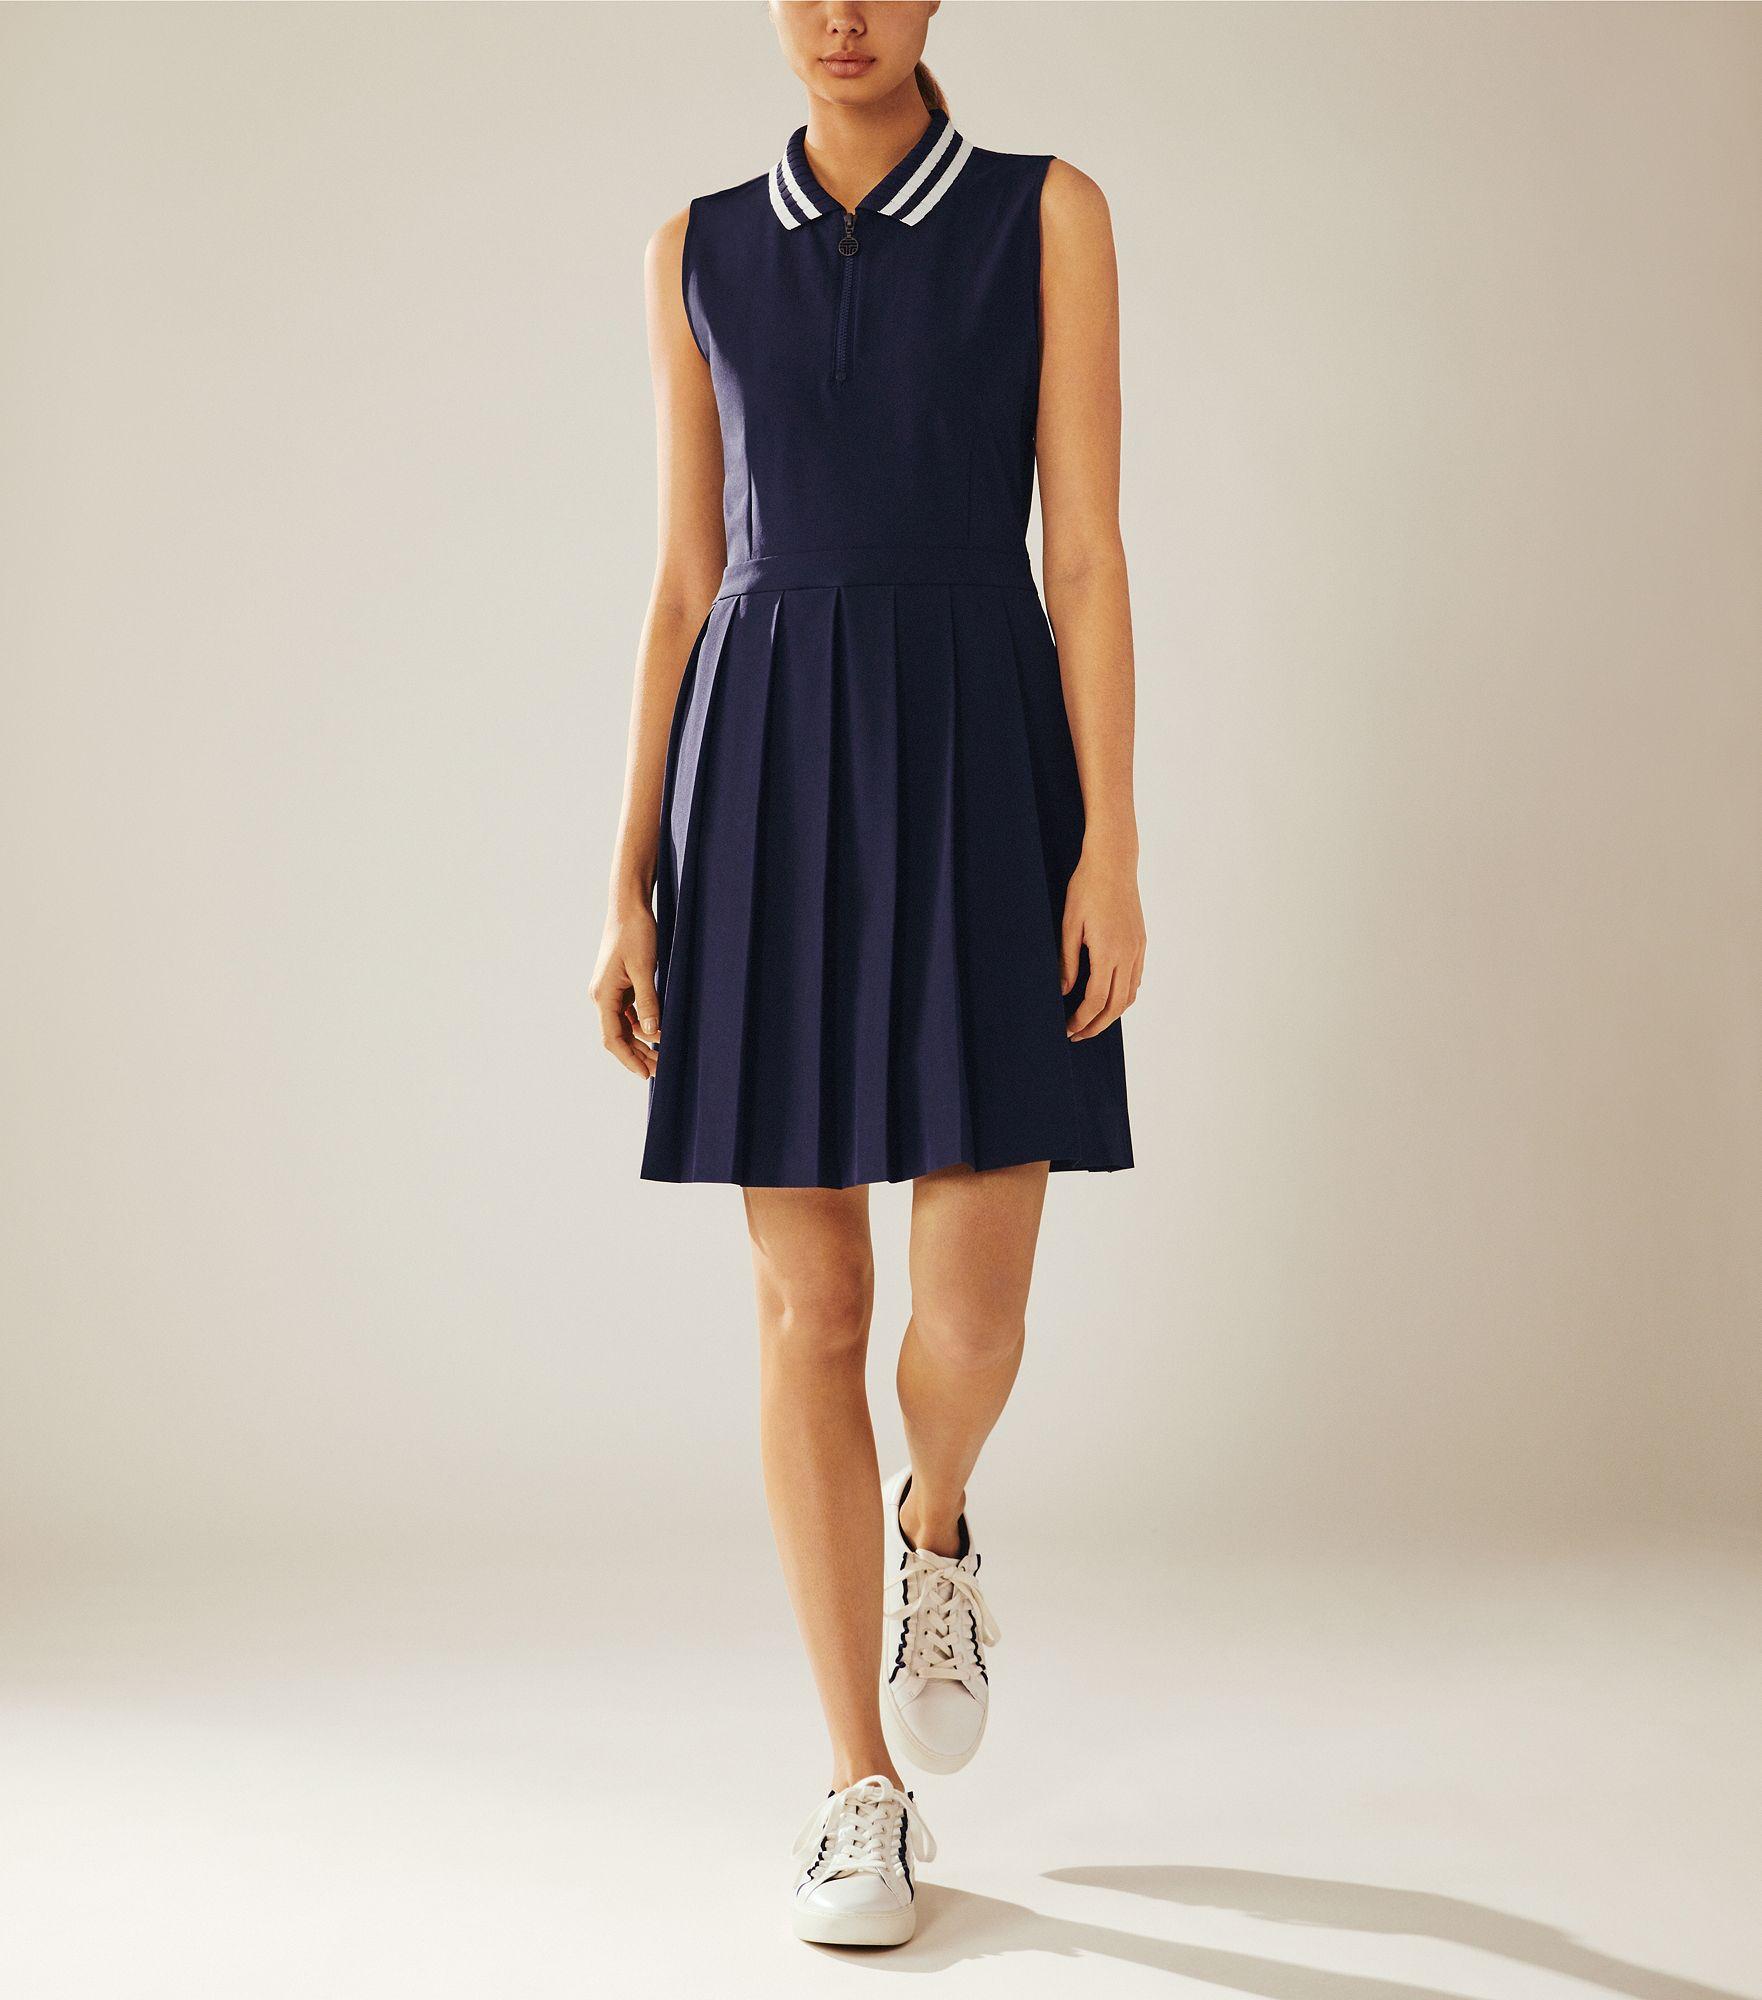 Tory Sport Performance Pleated Golf Dress in Navy Blue Blue Lyst